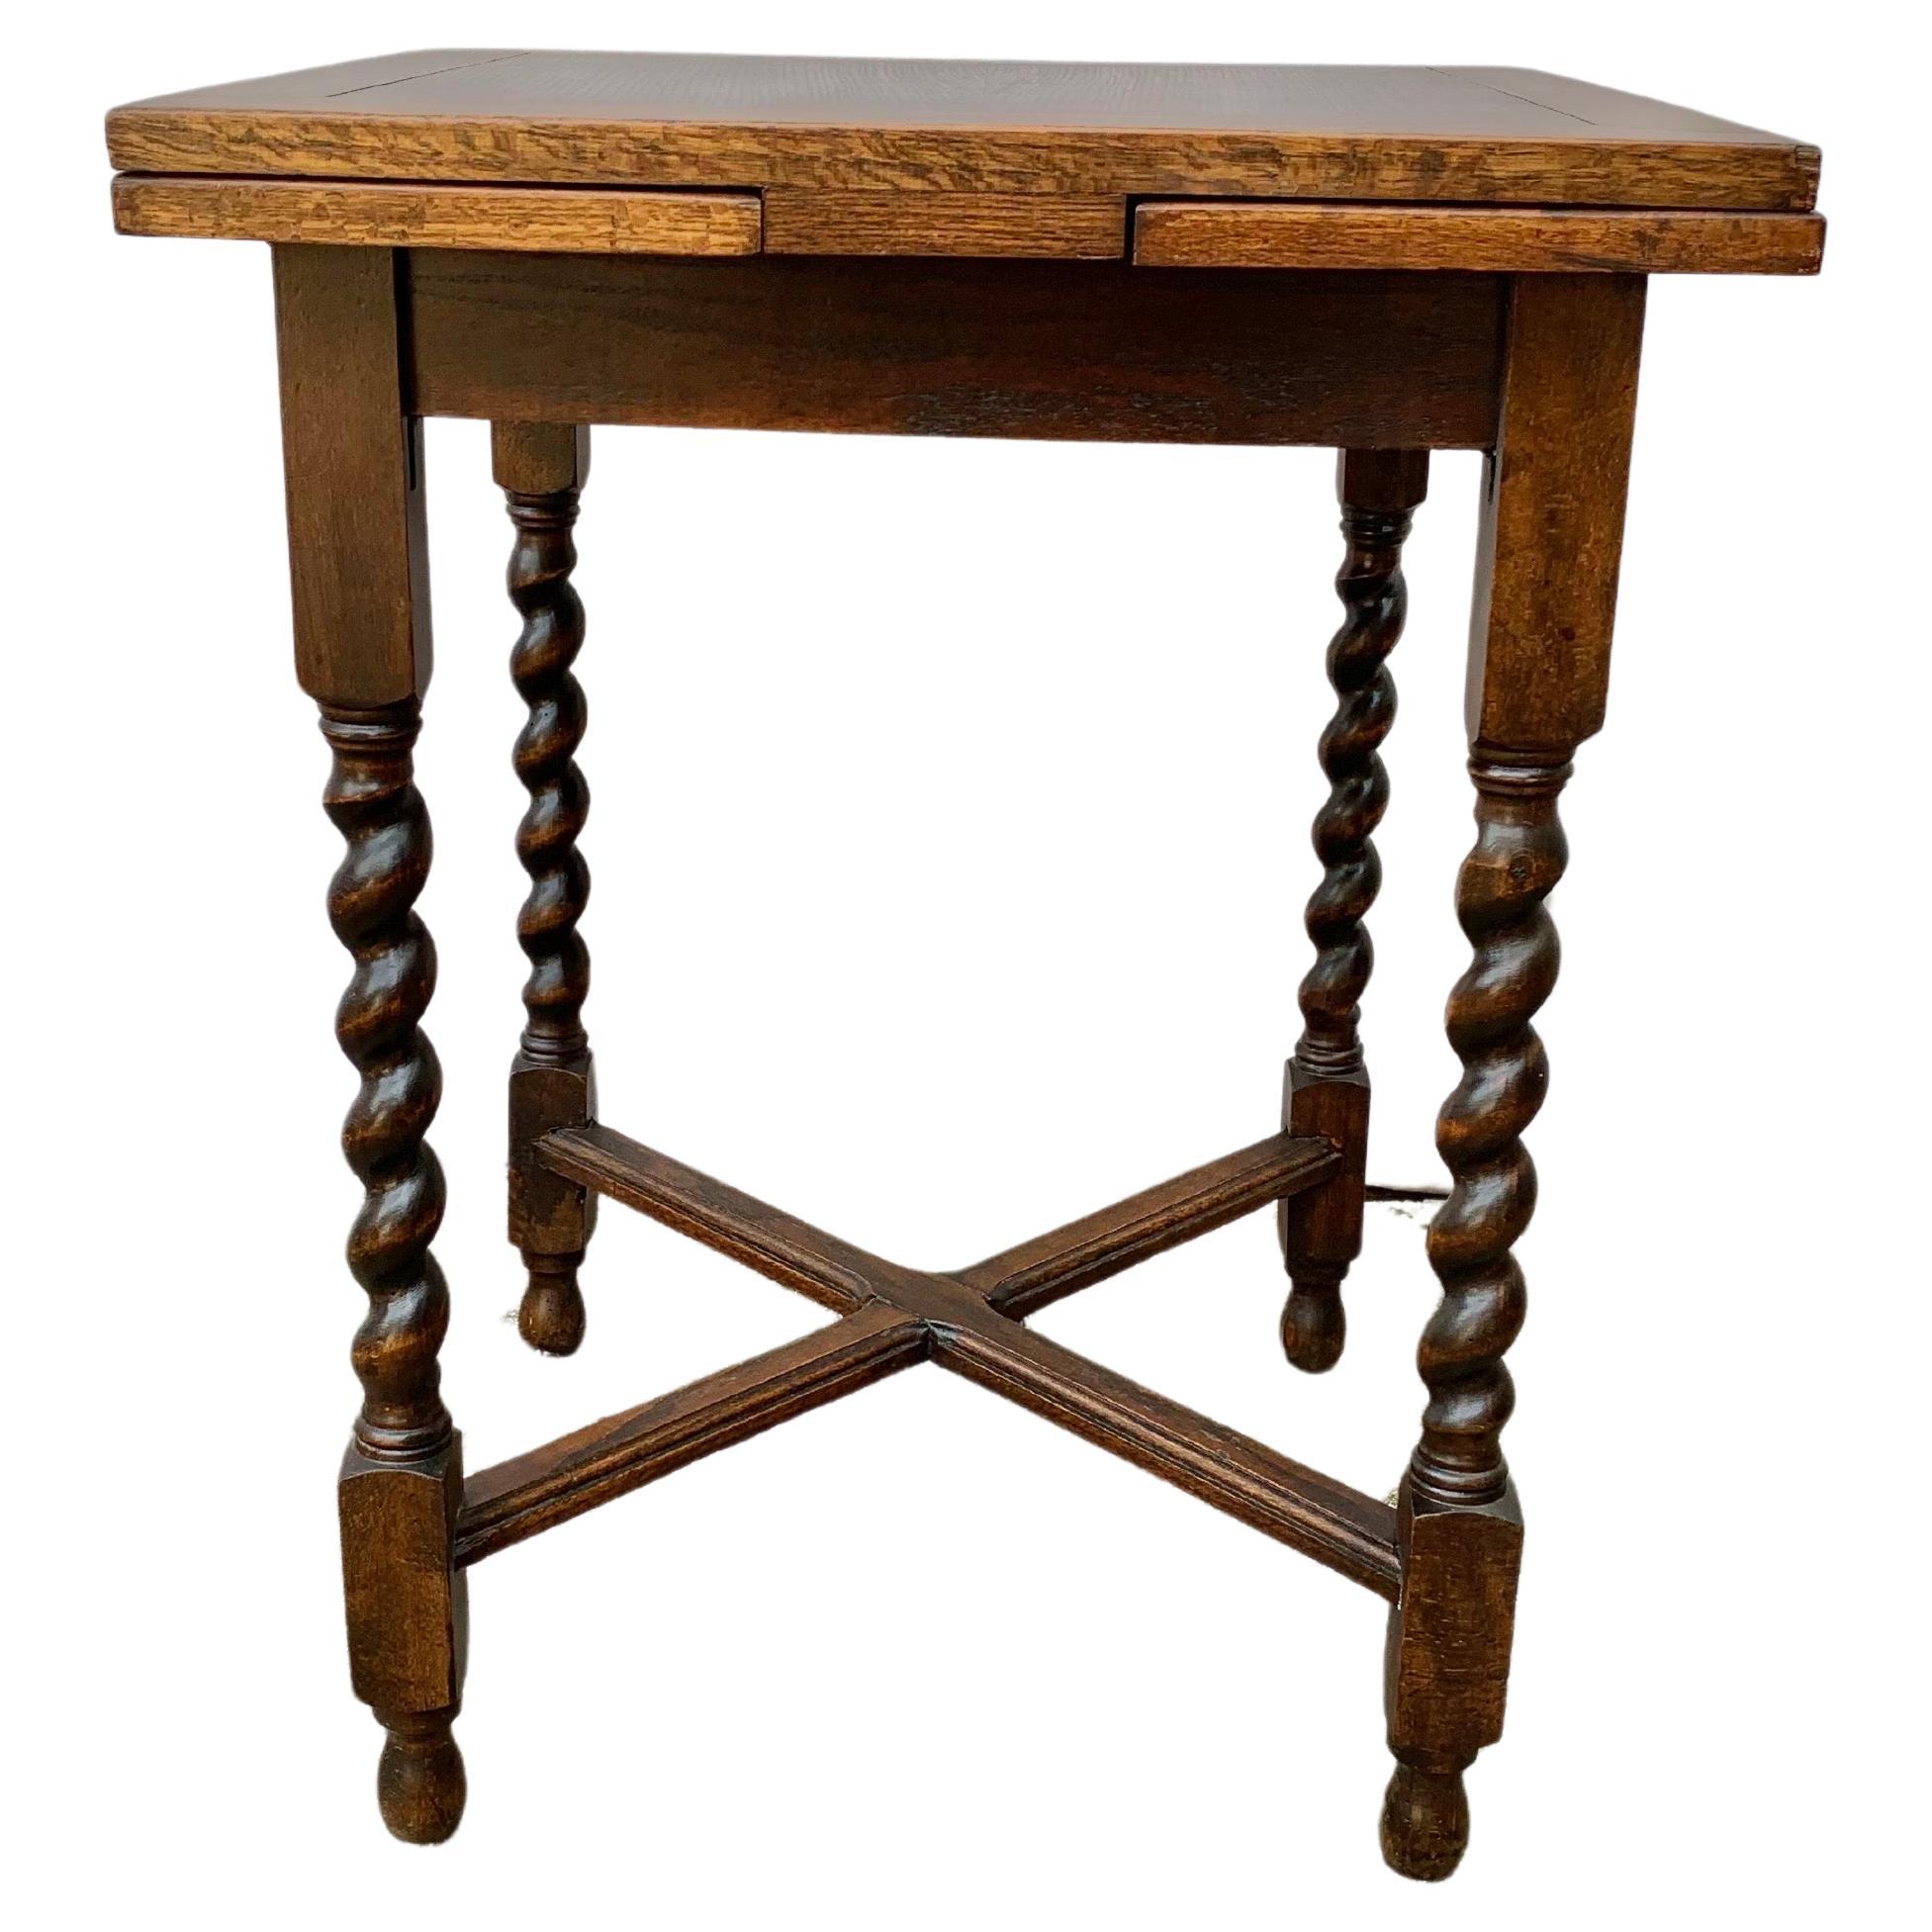 Found in England, this Early 20th Century Side Table was handcrafted by English furniture artisans from old growth oak in the early 1900's. The piece features a square top and two leaves that are paneled. Each leaf is secured in place in the